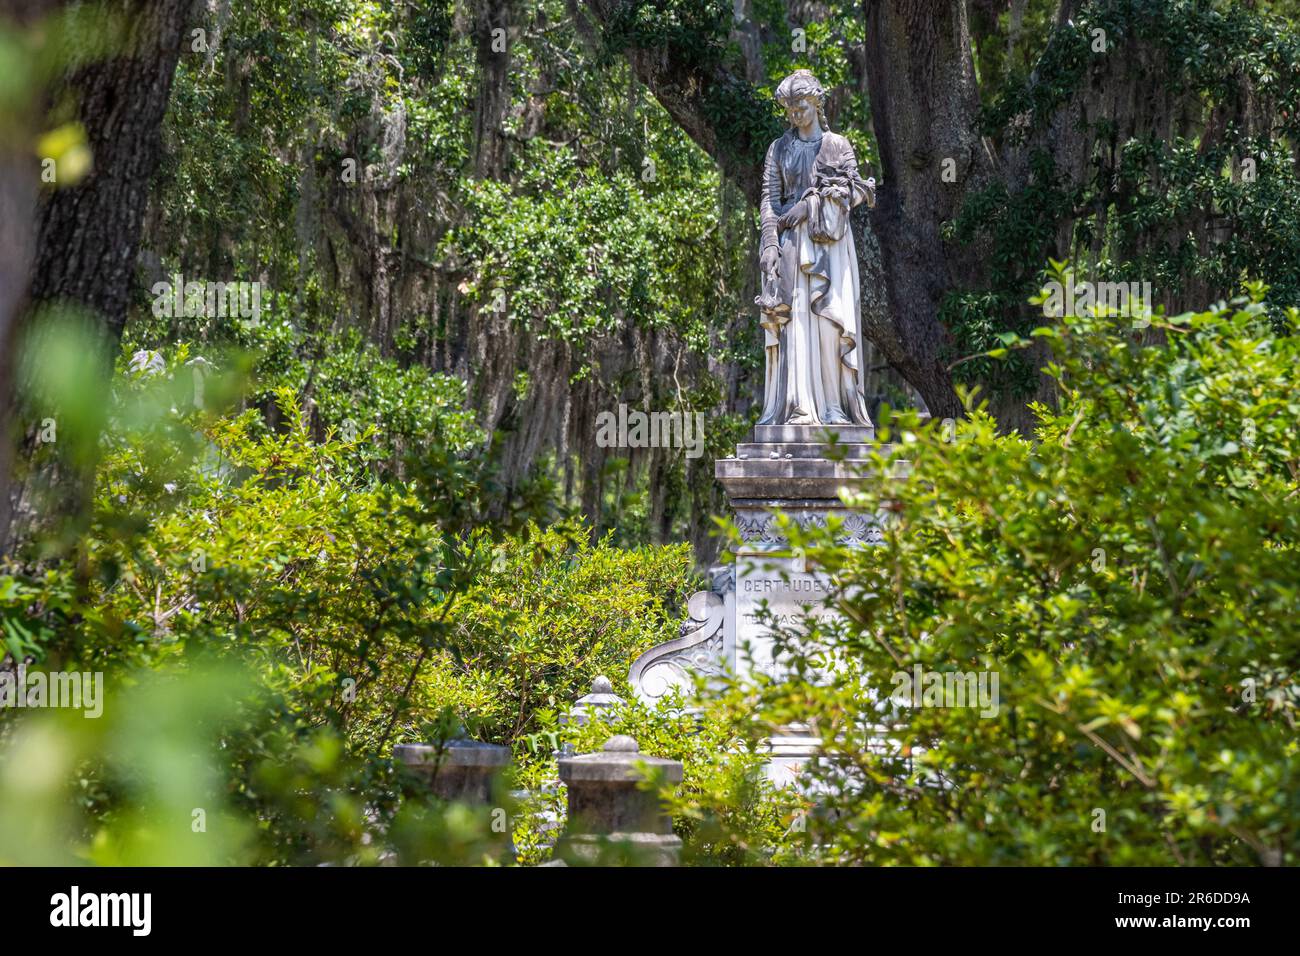 Grave monument statue of a woman amidst Spanish moss draped Southern live oaks at historic Bonaventure Cemetery in Savannah, Georgia. (USA) Stock Photo